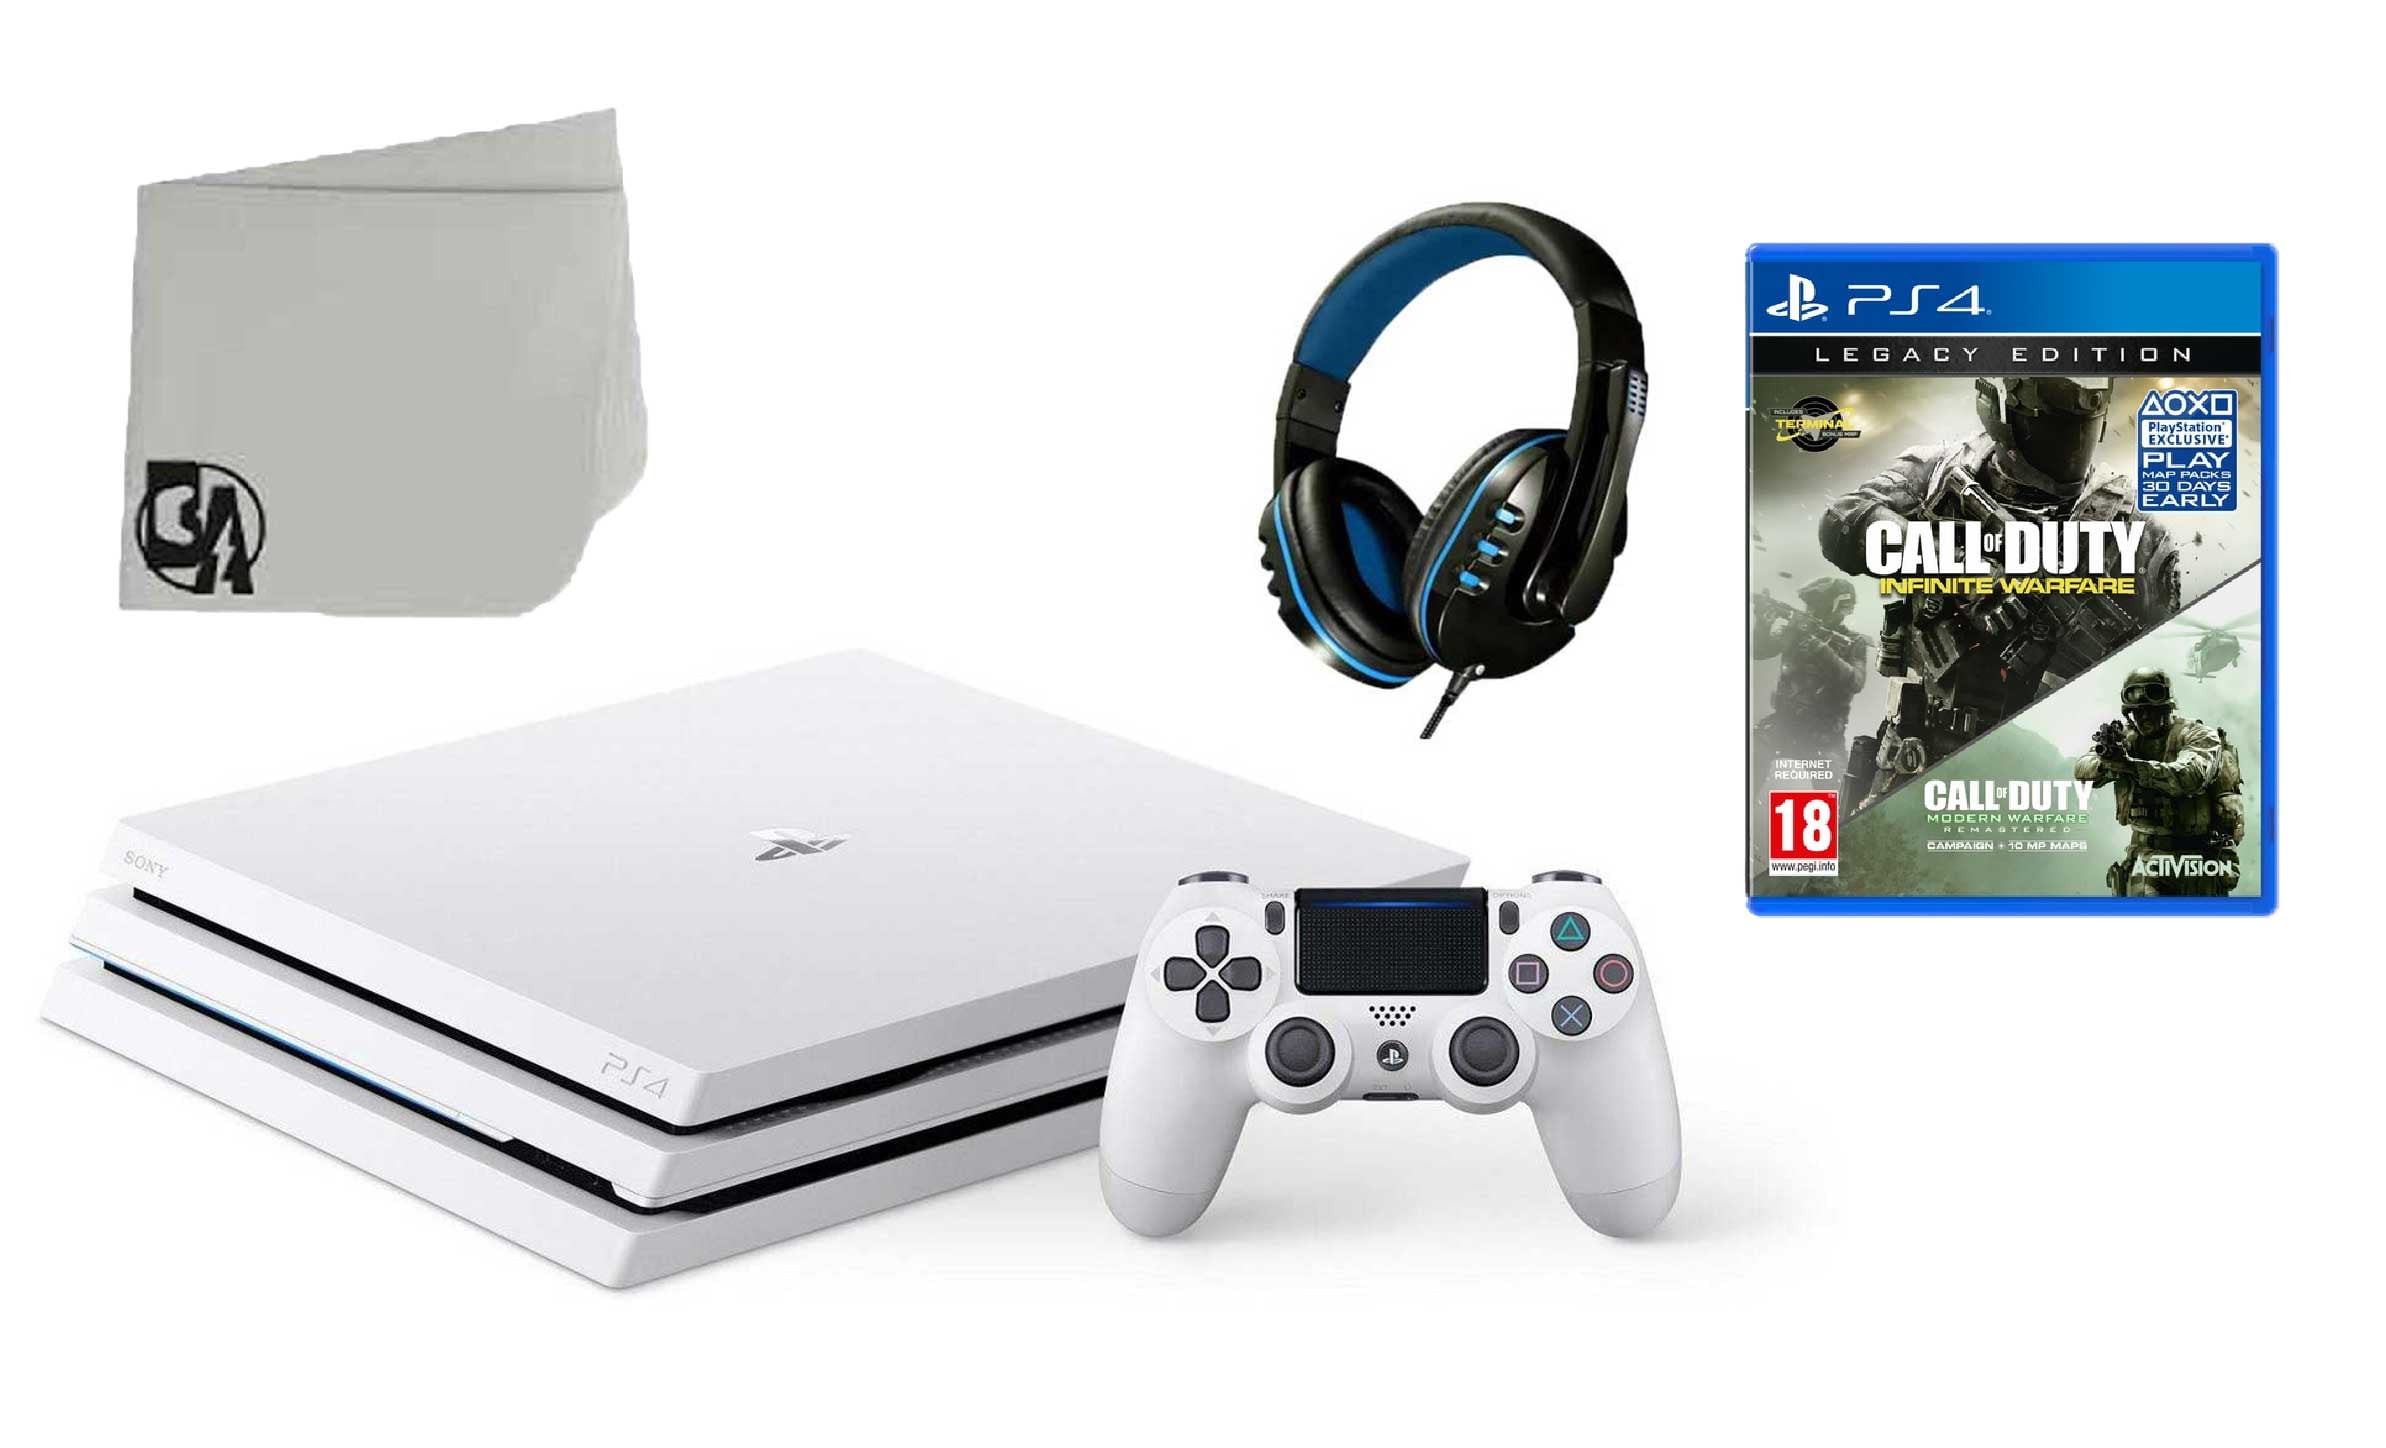 PS4 PRO 1TB REFURBHISED WITH 1 YEAR WARRANTY WITH 55 GAMES ONLINE ACCESS.  VISIT OUR WEBSITE FOR OFFER. Shadowgames.in